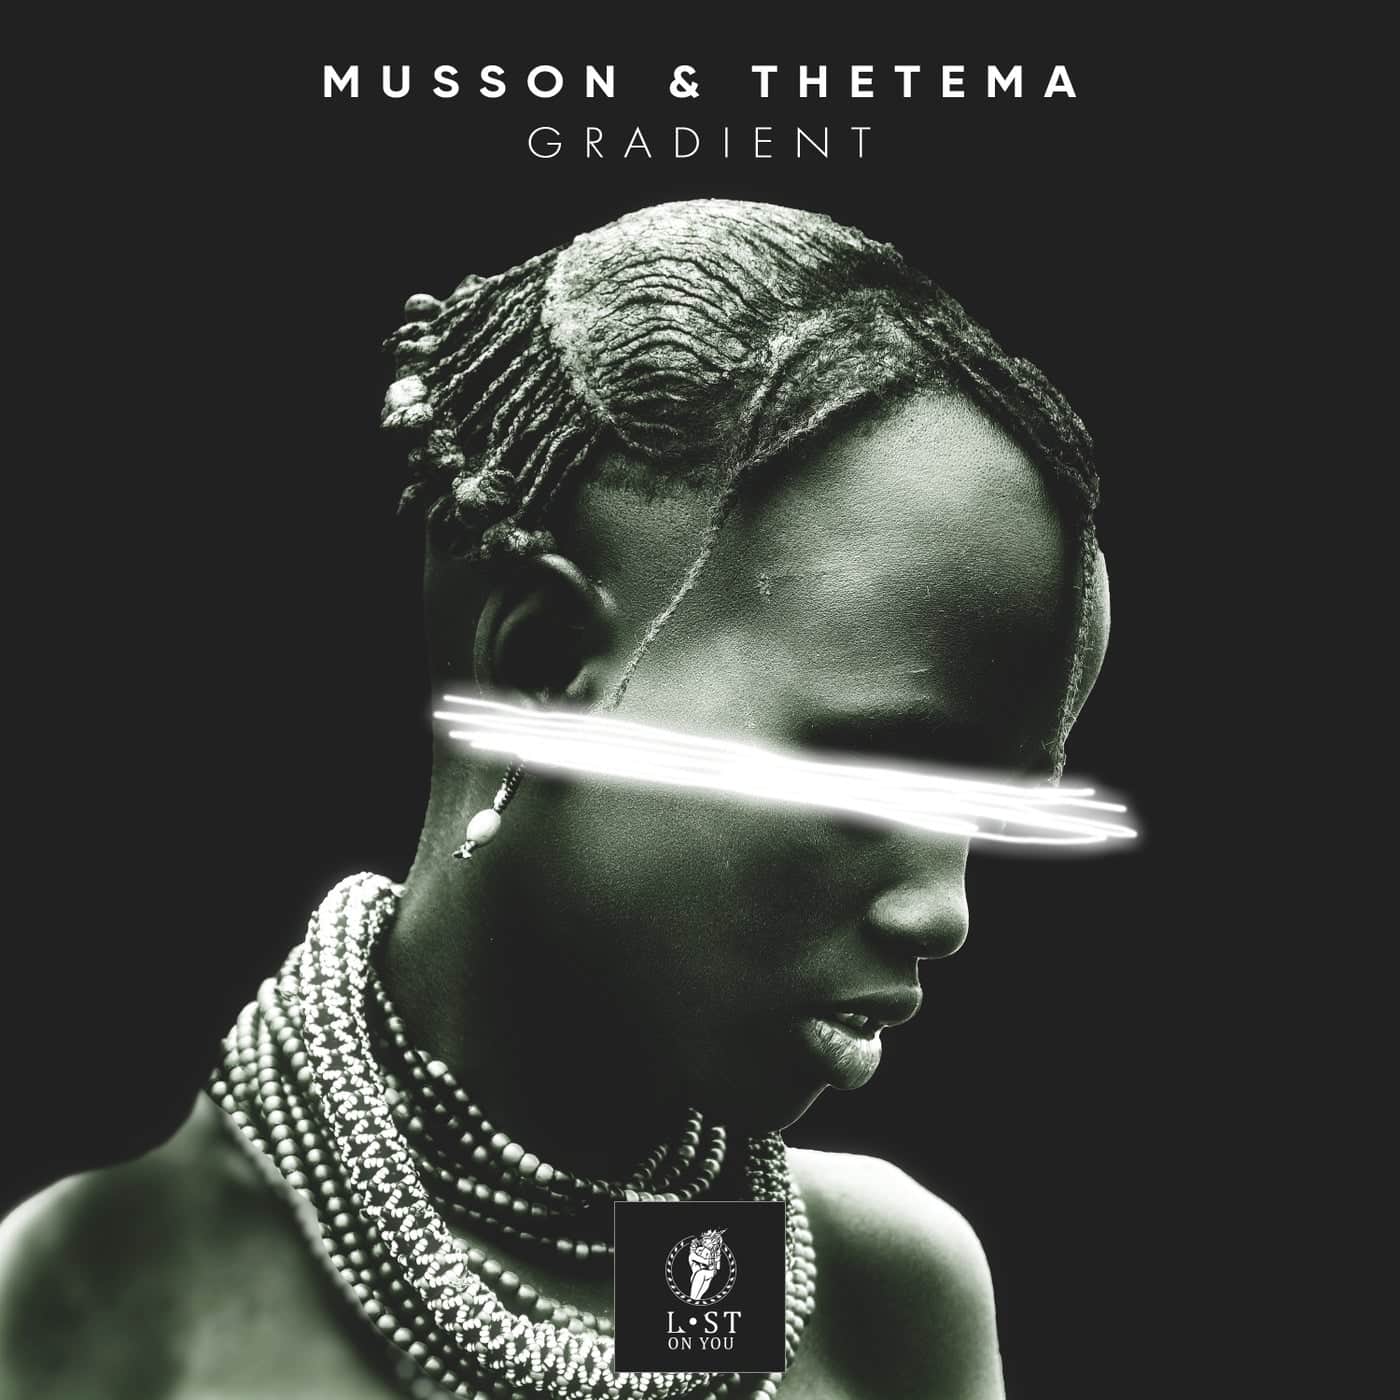 Download Musson, thetema - Gradient on Electrobuzz